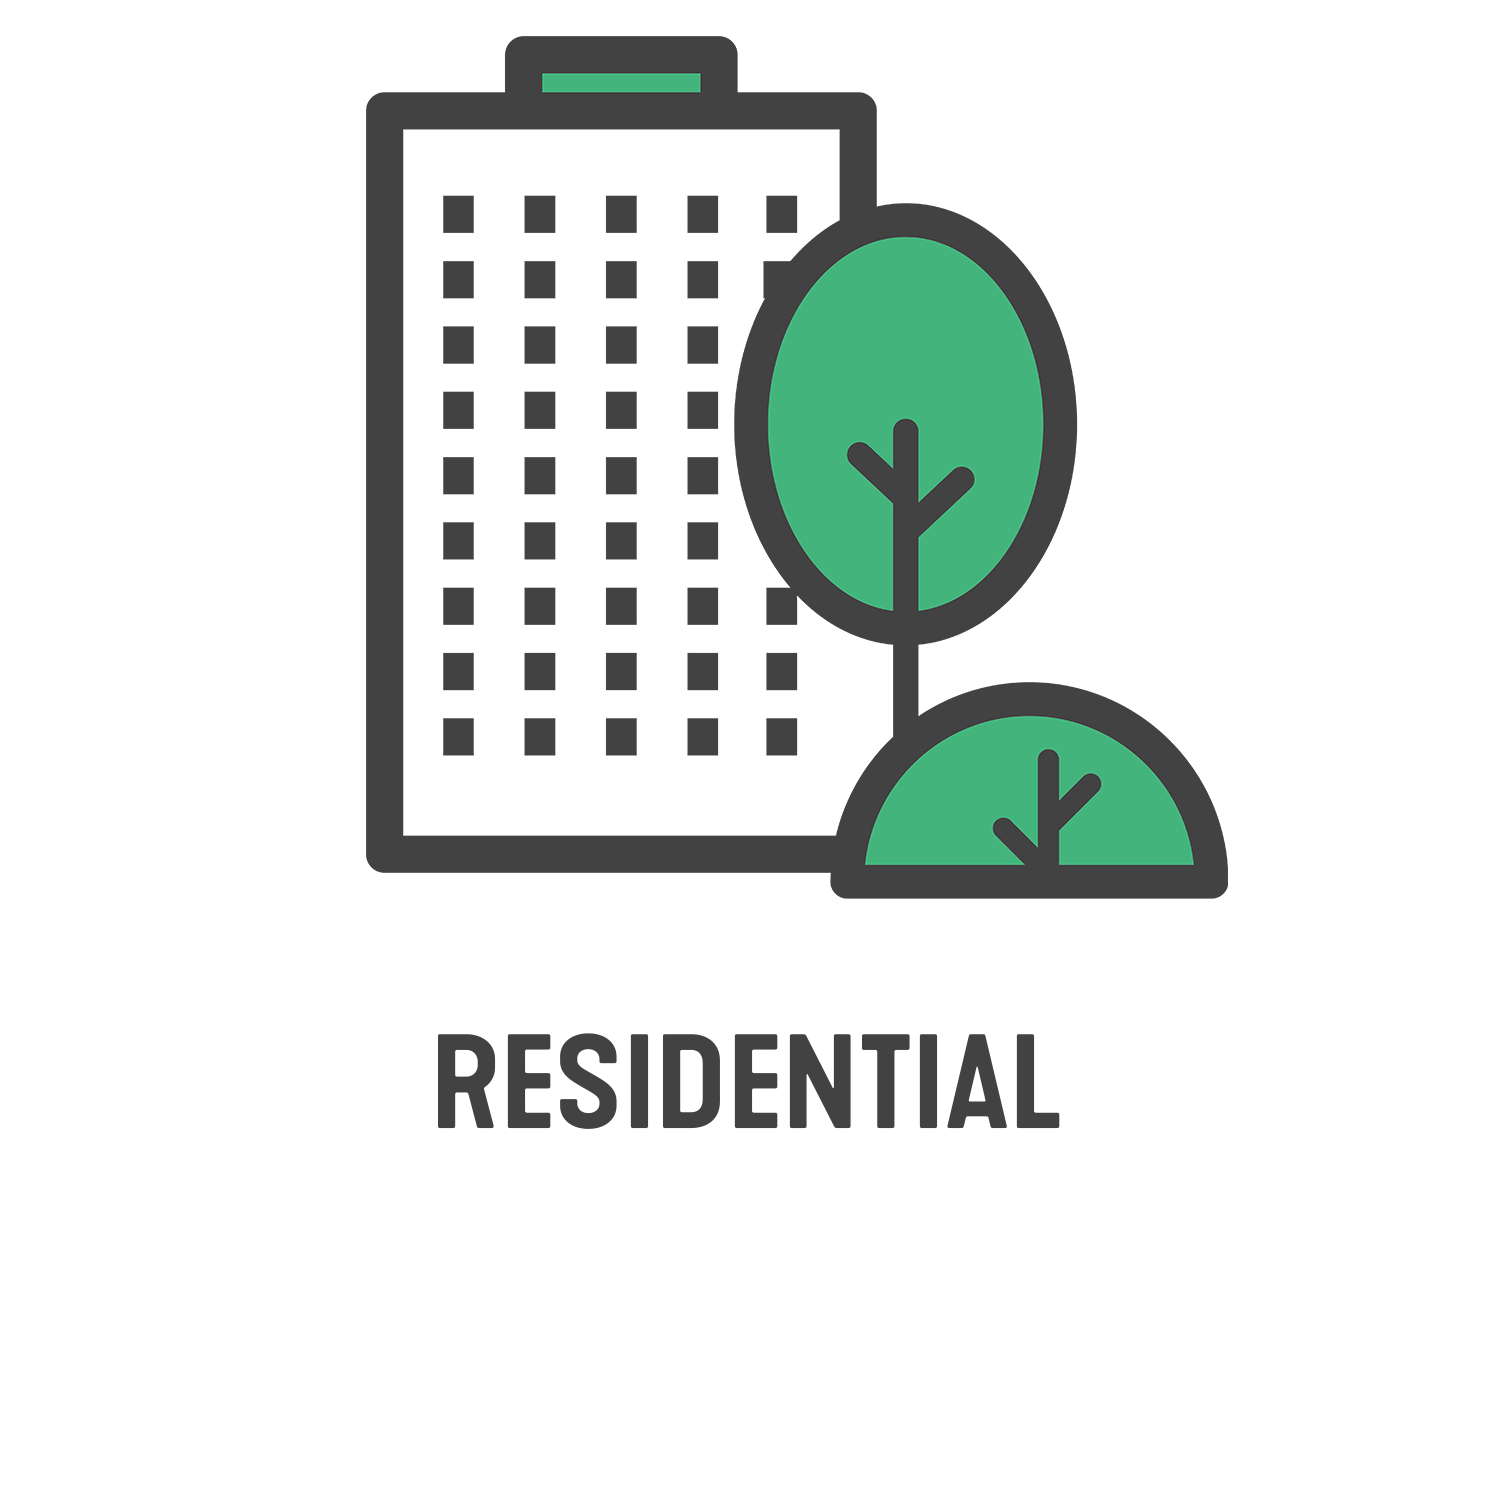 Residential Landing Page Icon for Workplace